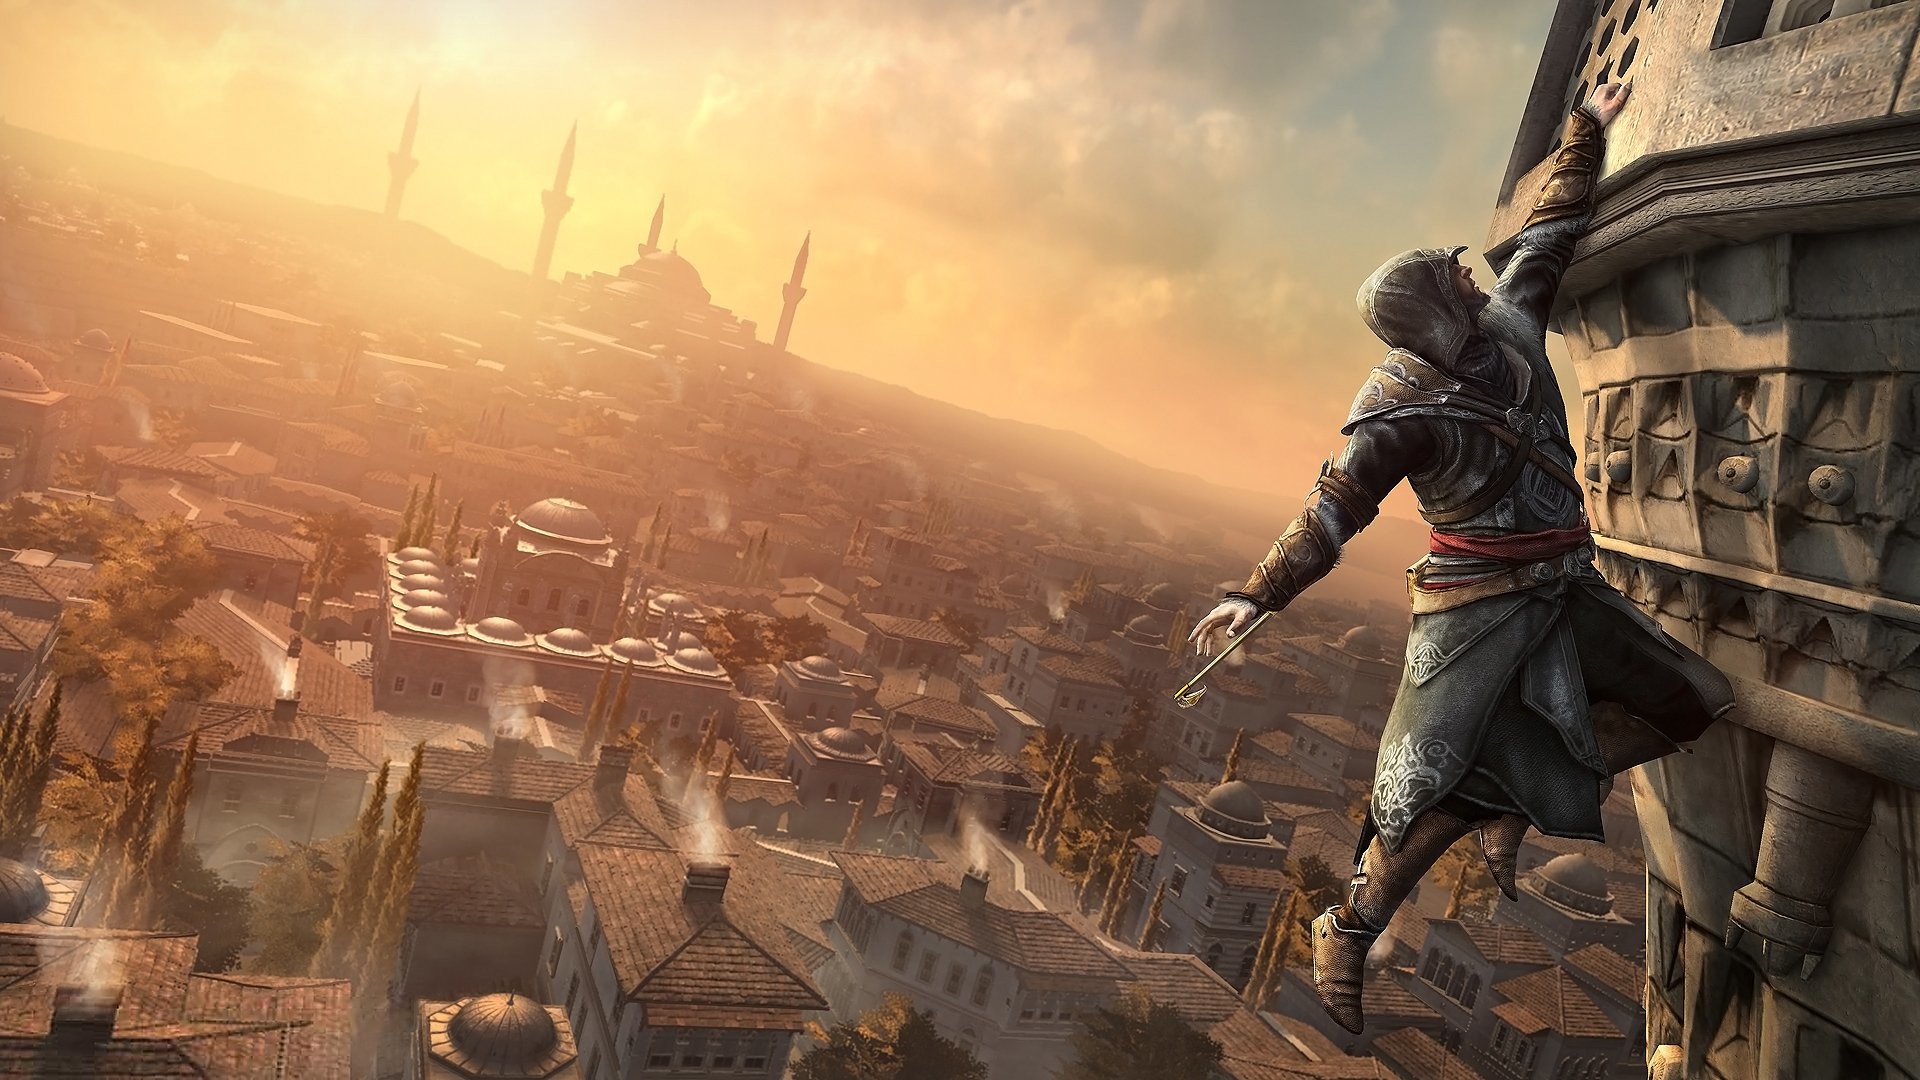 1920x1080 Assassins Creed Revelations Wallpapers HD Wallpapers